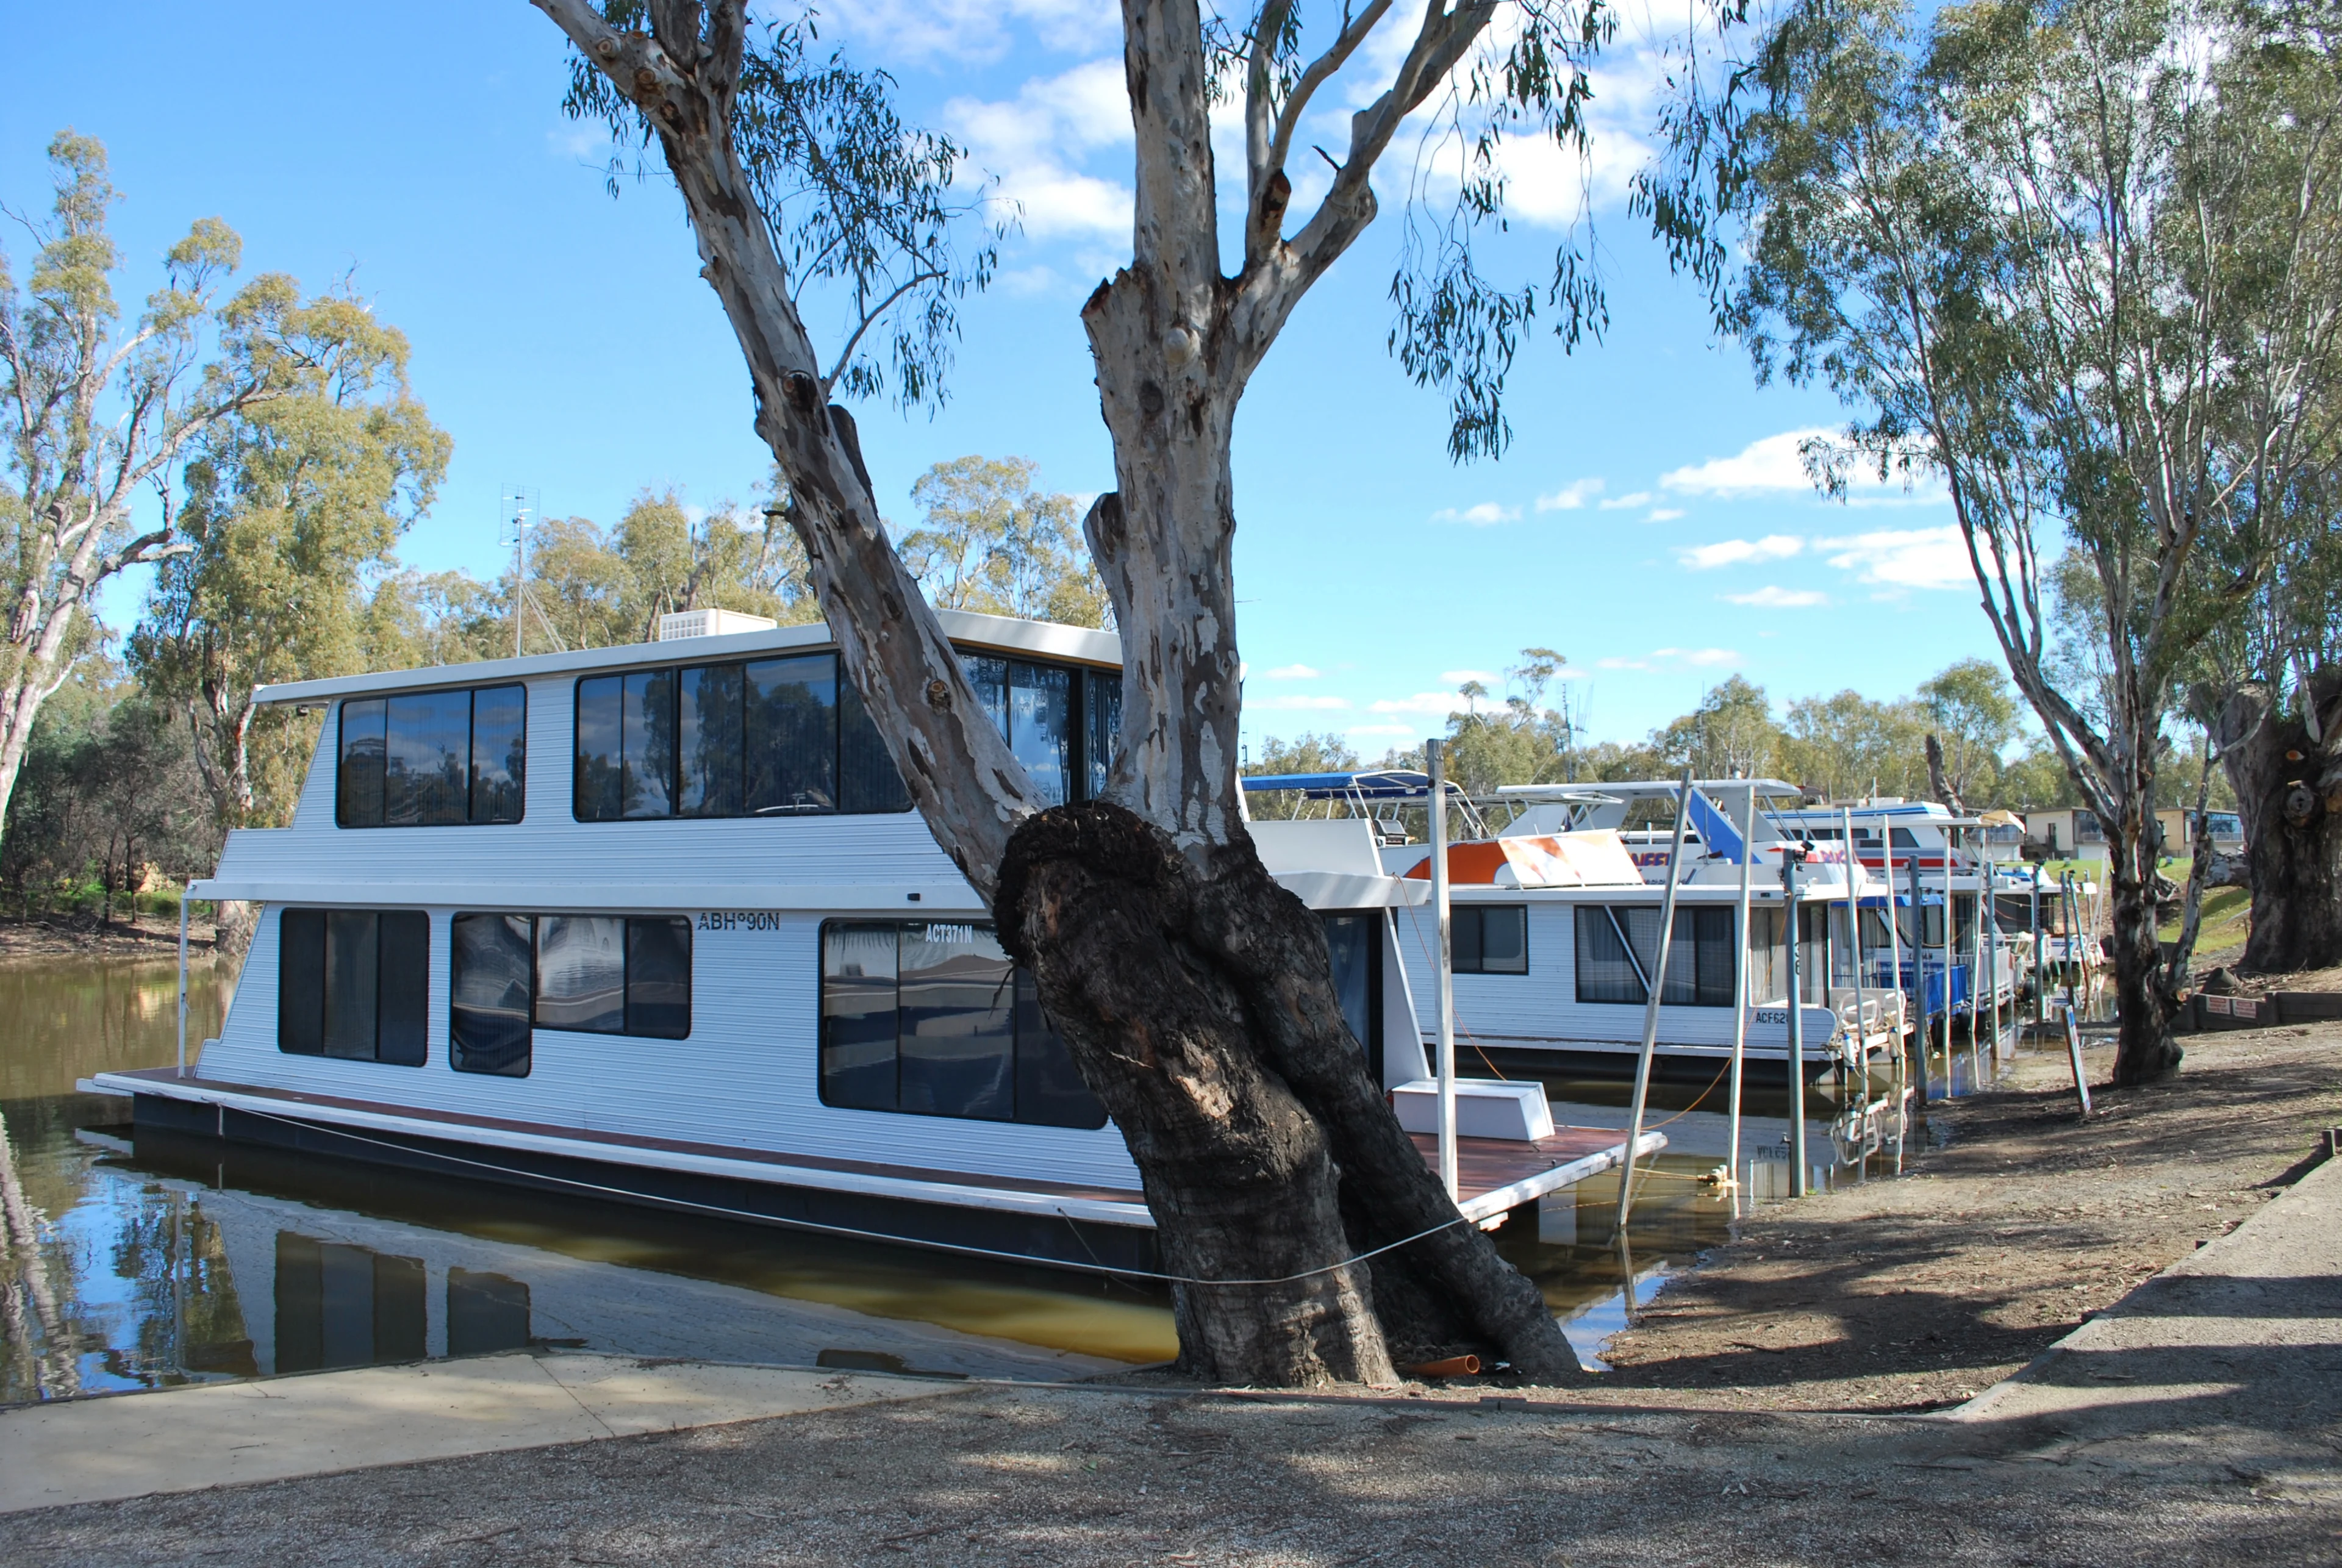 Houseboats moored at Deep Creek Marina near Moama, on the New South Wales side of the Murray River